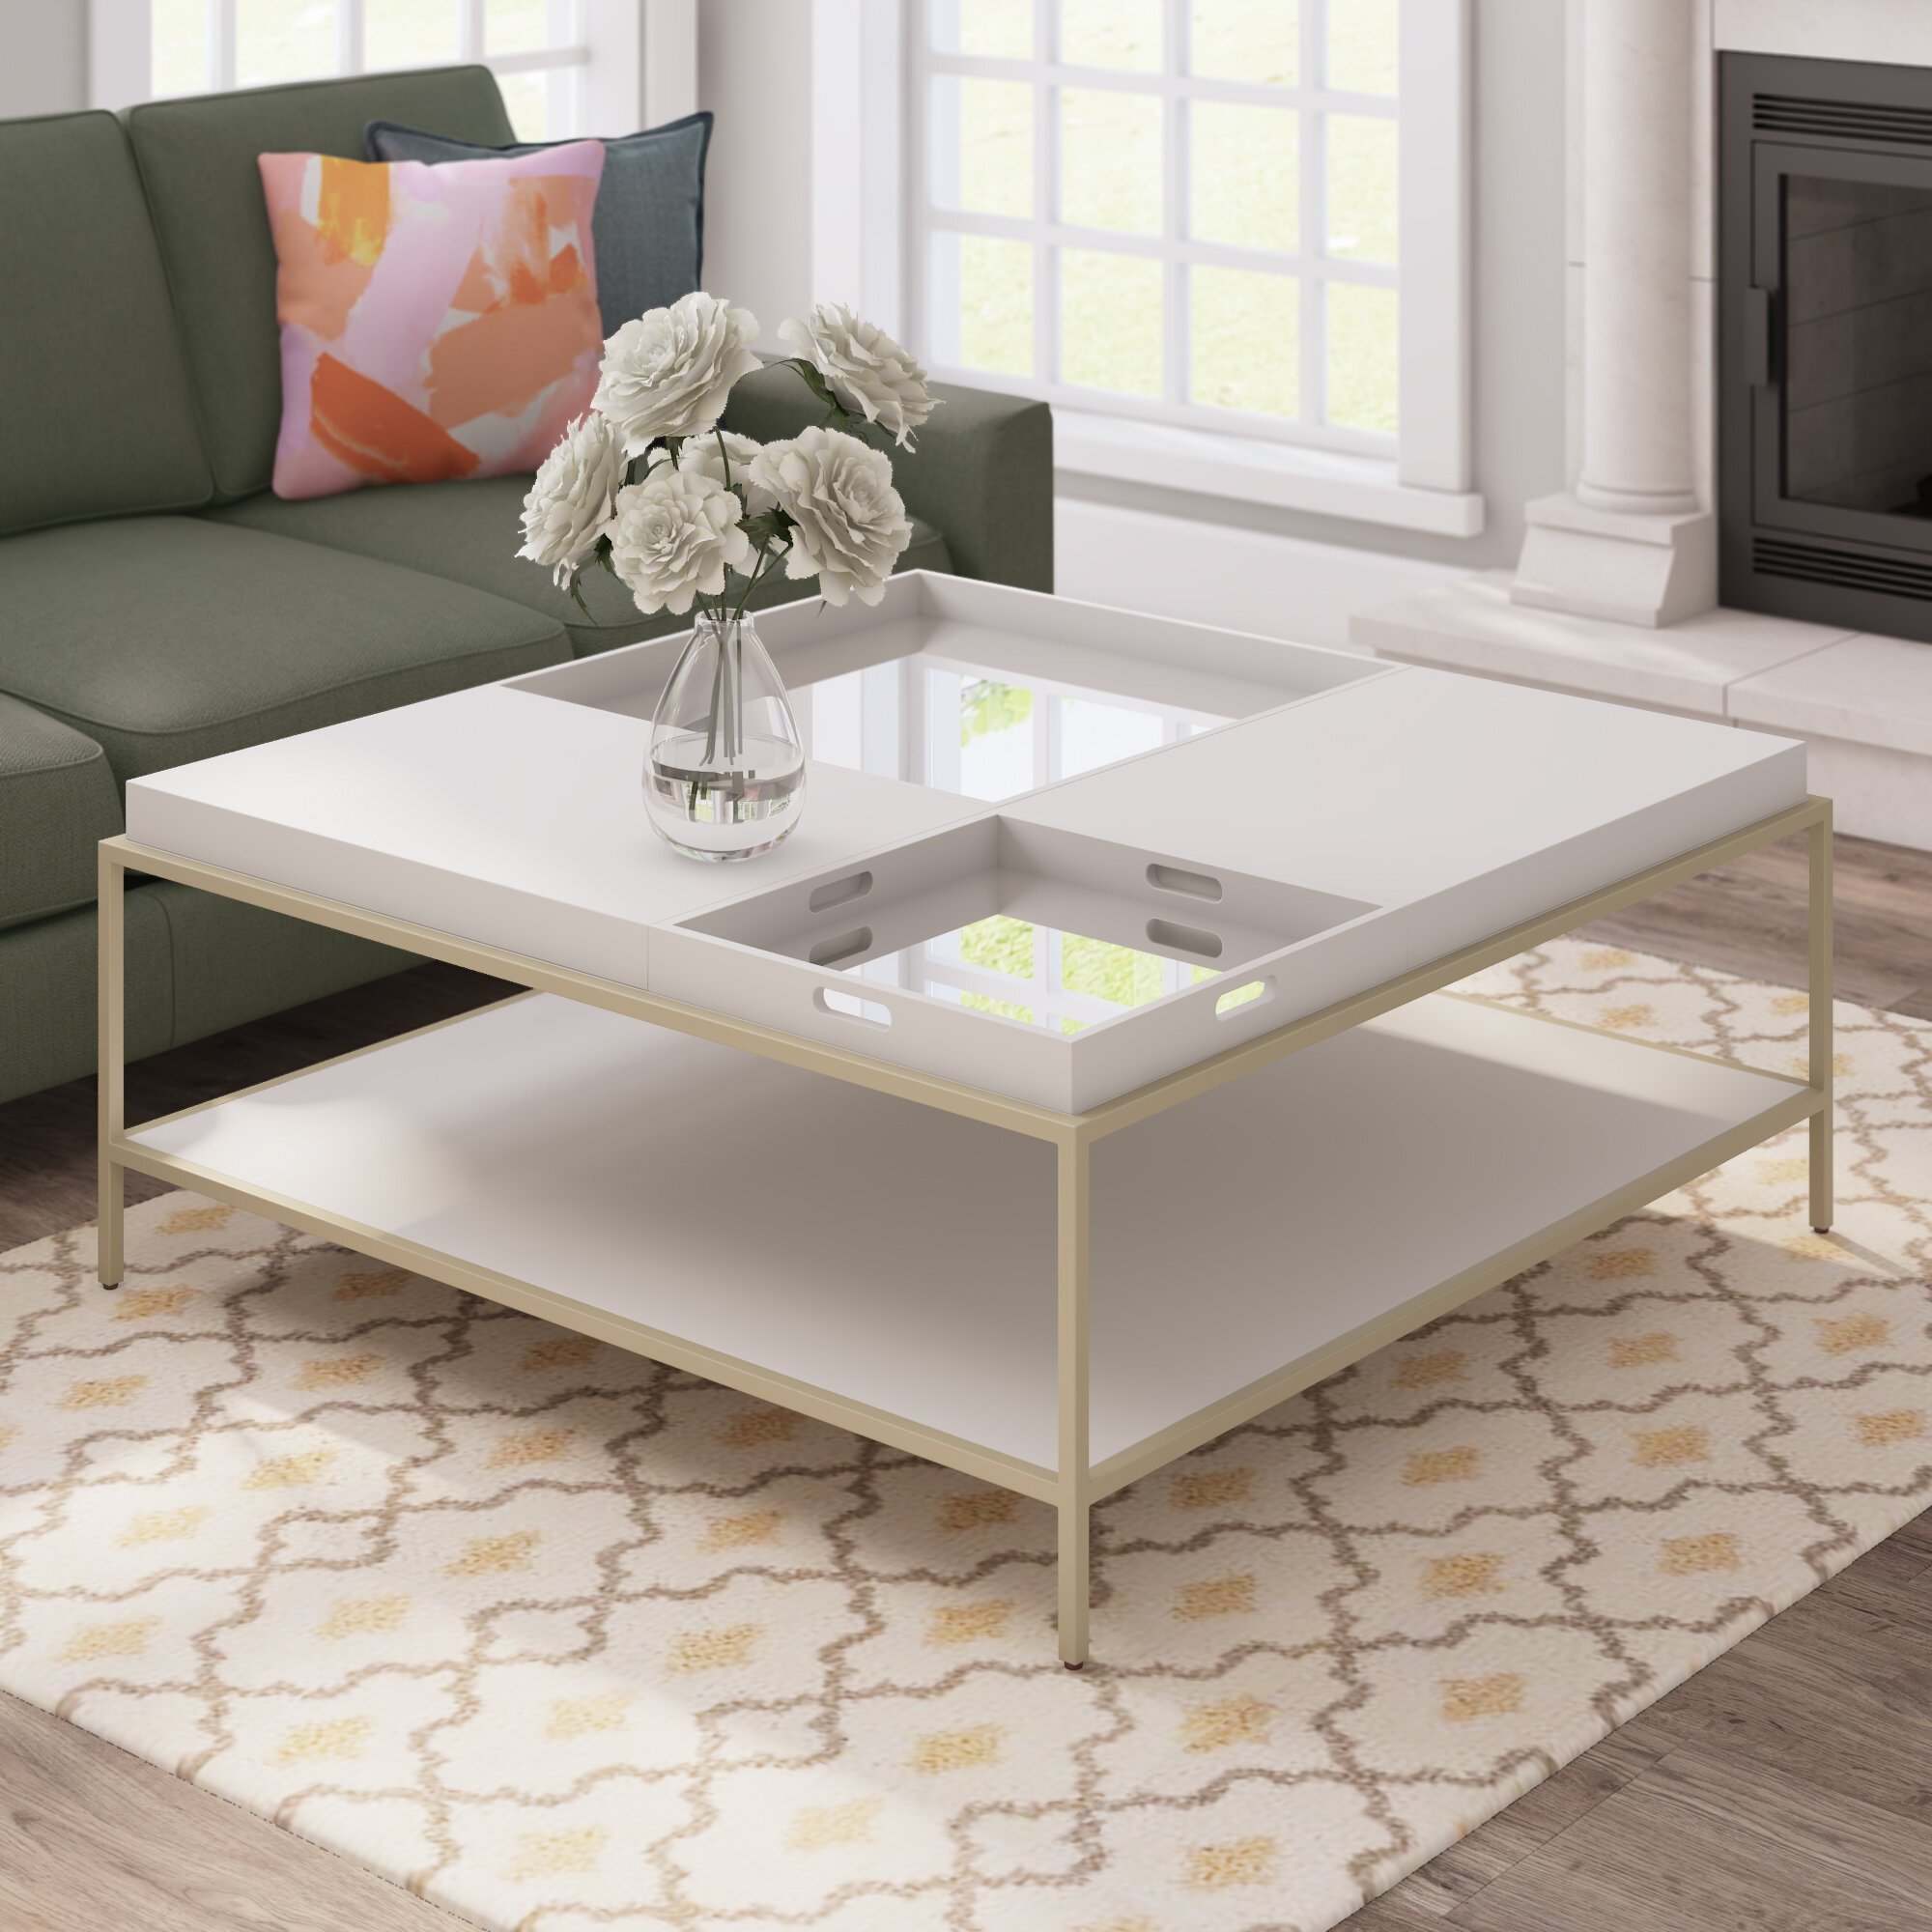 48 Square Coffee Table Youll Love In 2021 Visualhunt